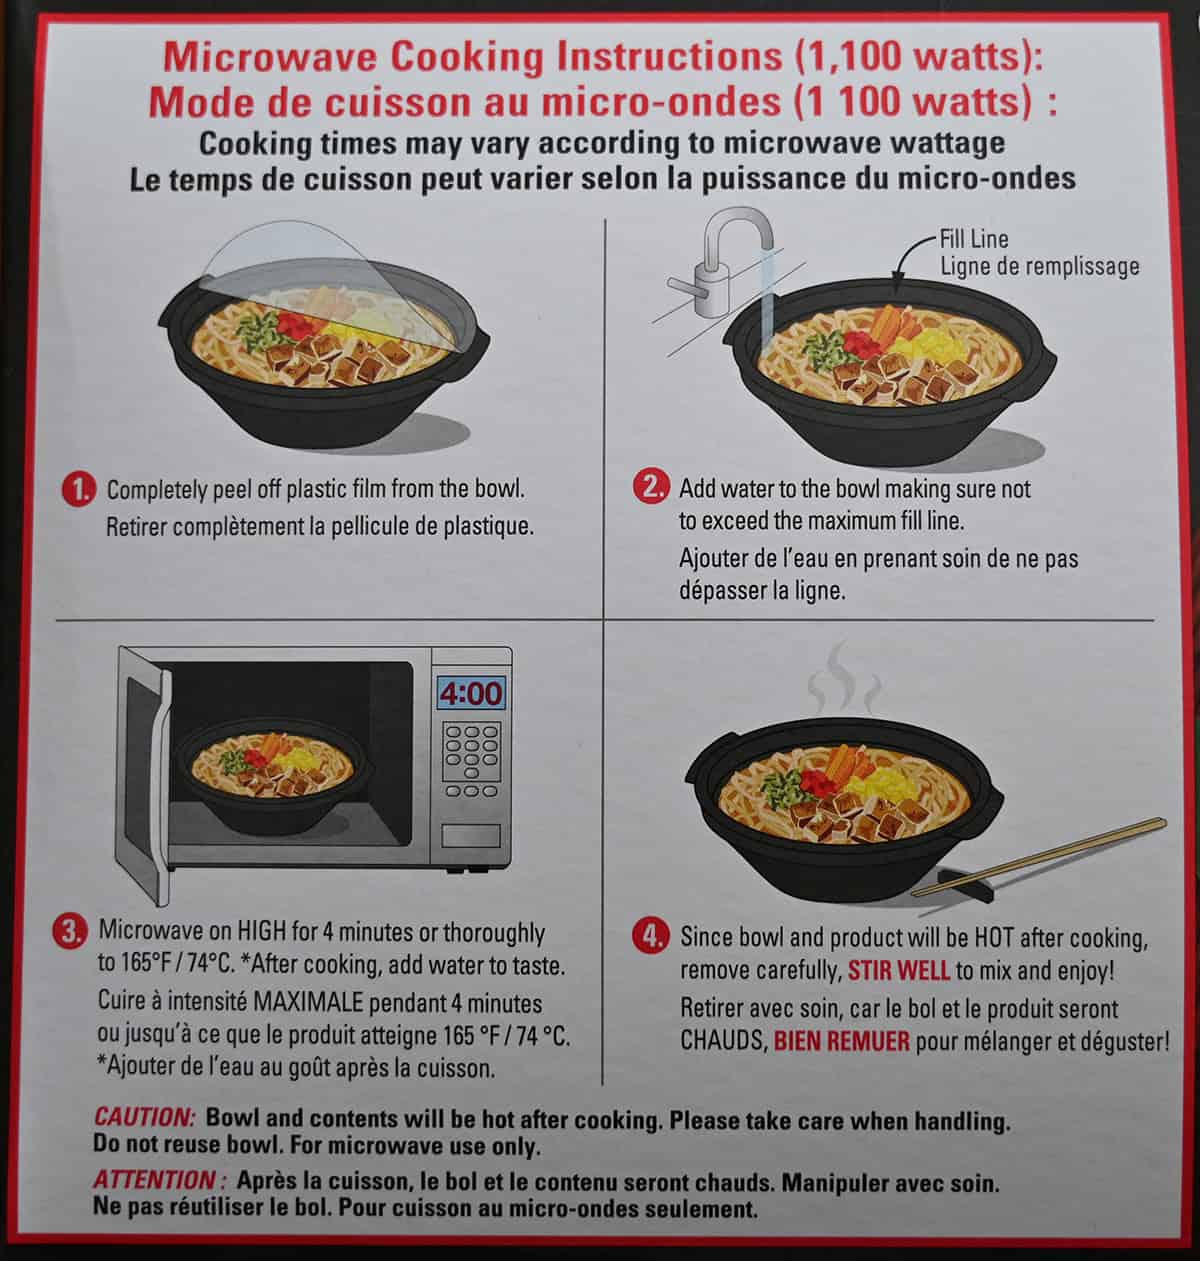 Image of the back of the box of ramen showing the cooking instructions.